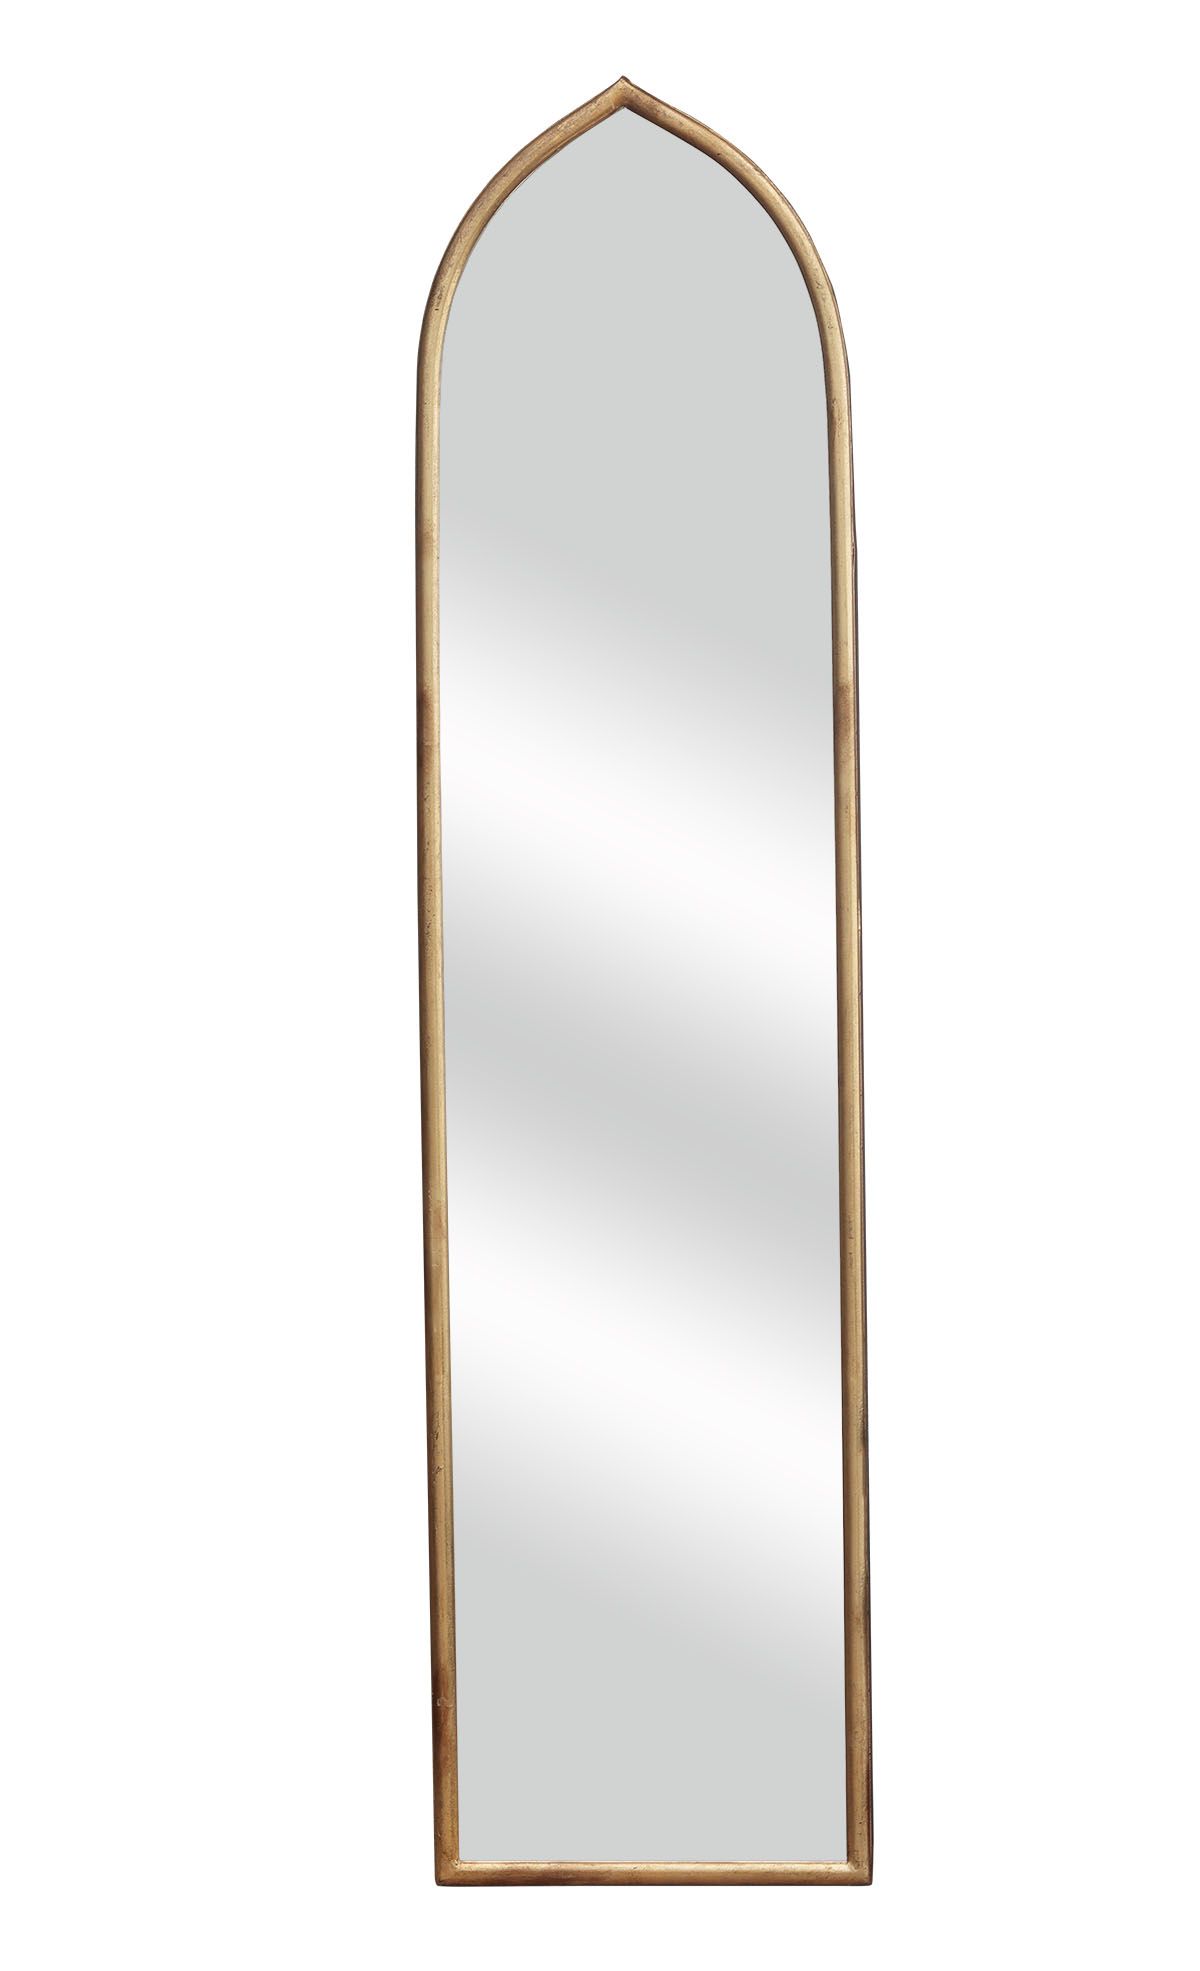 Antique Aluminum Wall Mirrors In Best And Newest Vintage Full Length Wall Mirror With Arched Metal Frame, Simple Full (View 15 of 15)